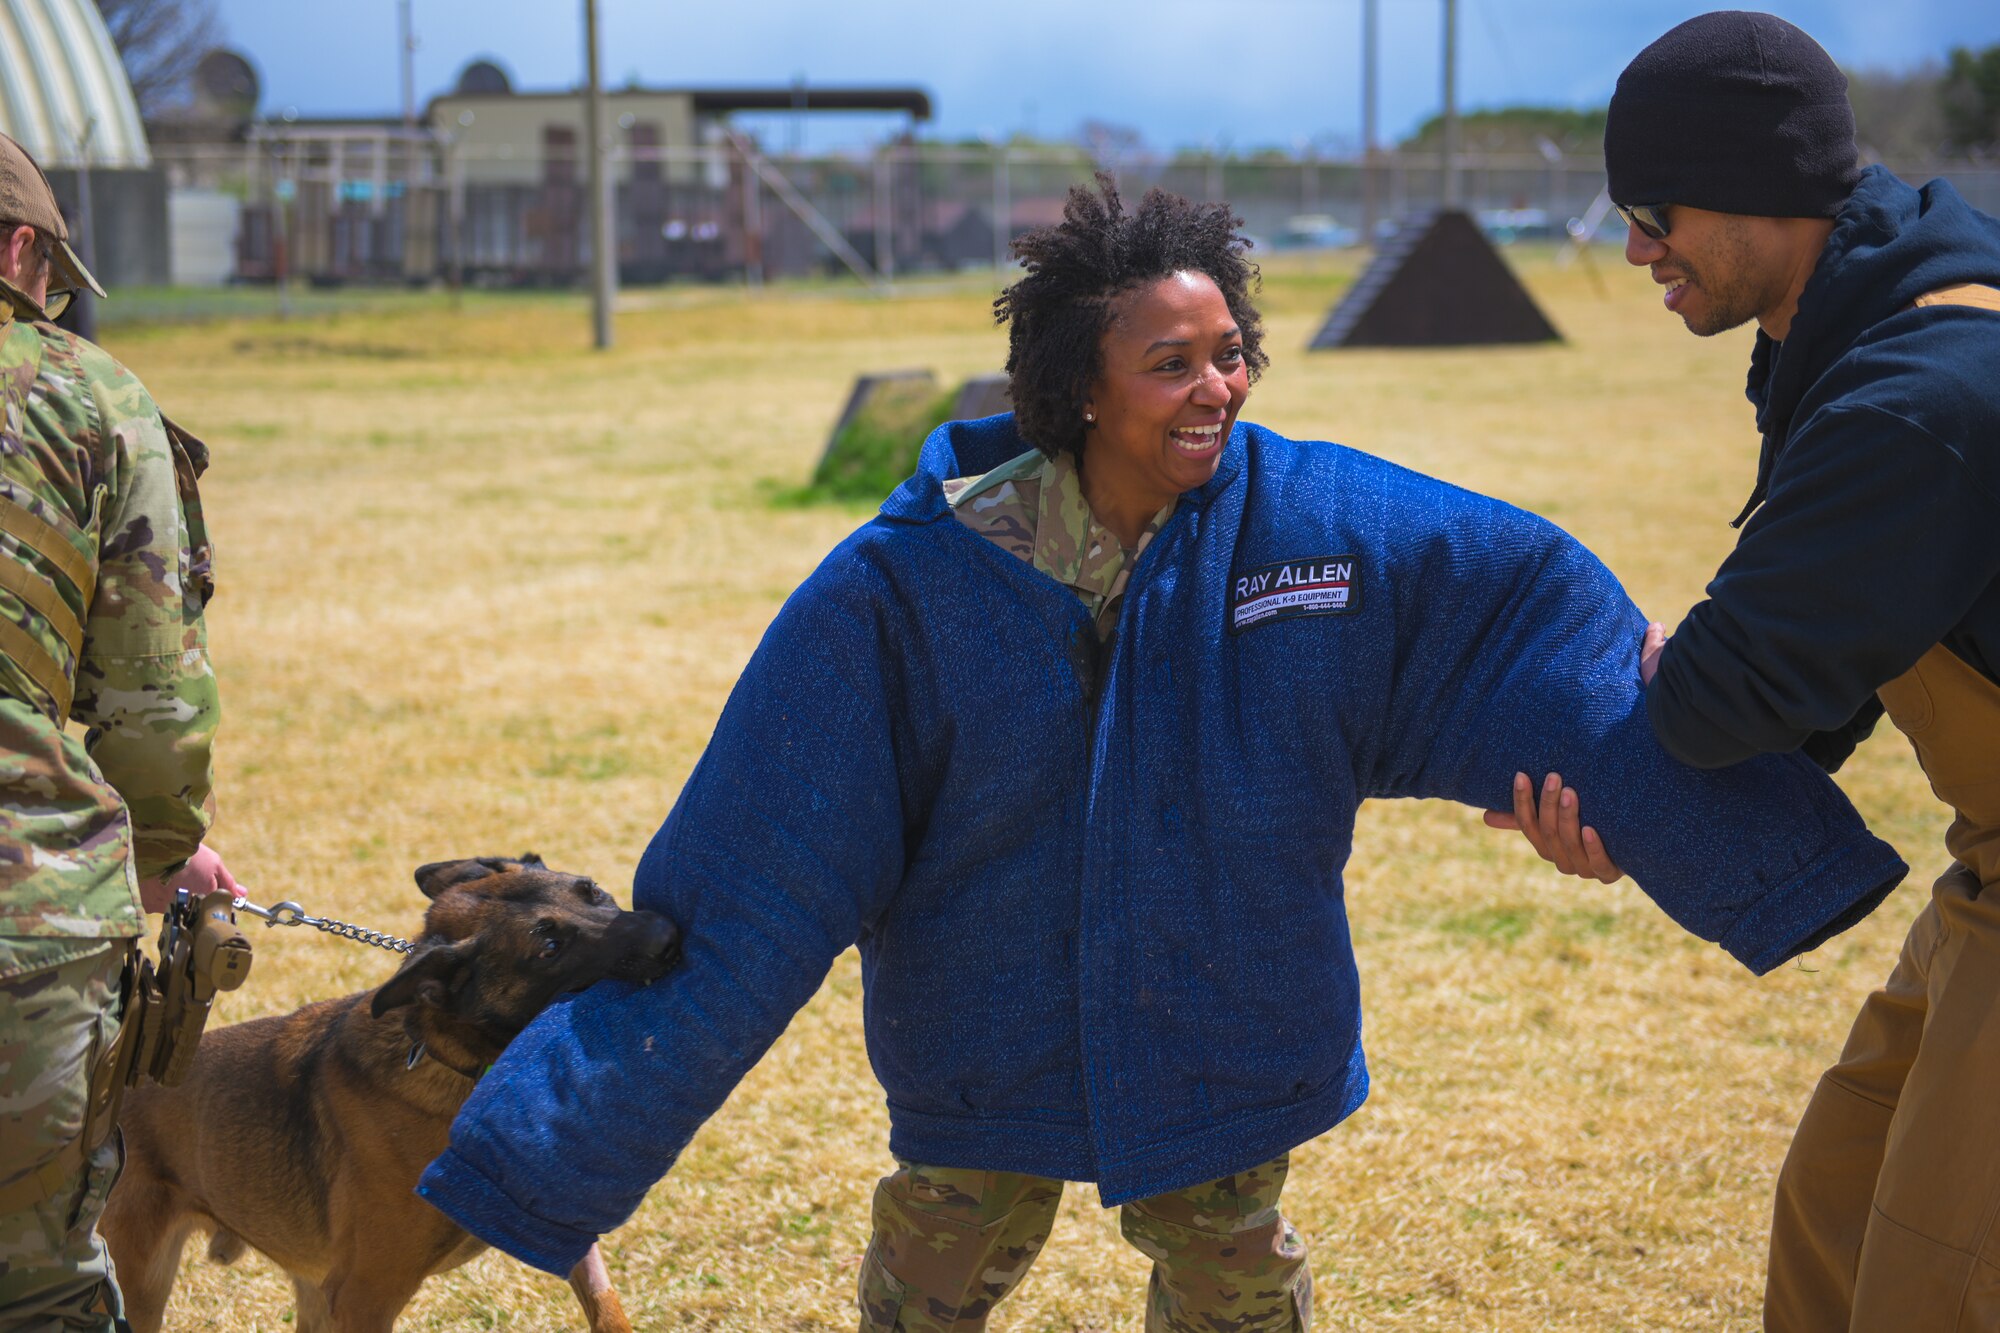 MWD handlers provide training to MWDs used in patrol as well as drug and explosive detection.